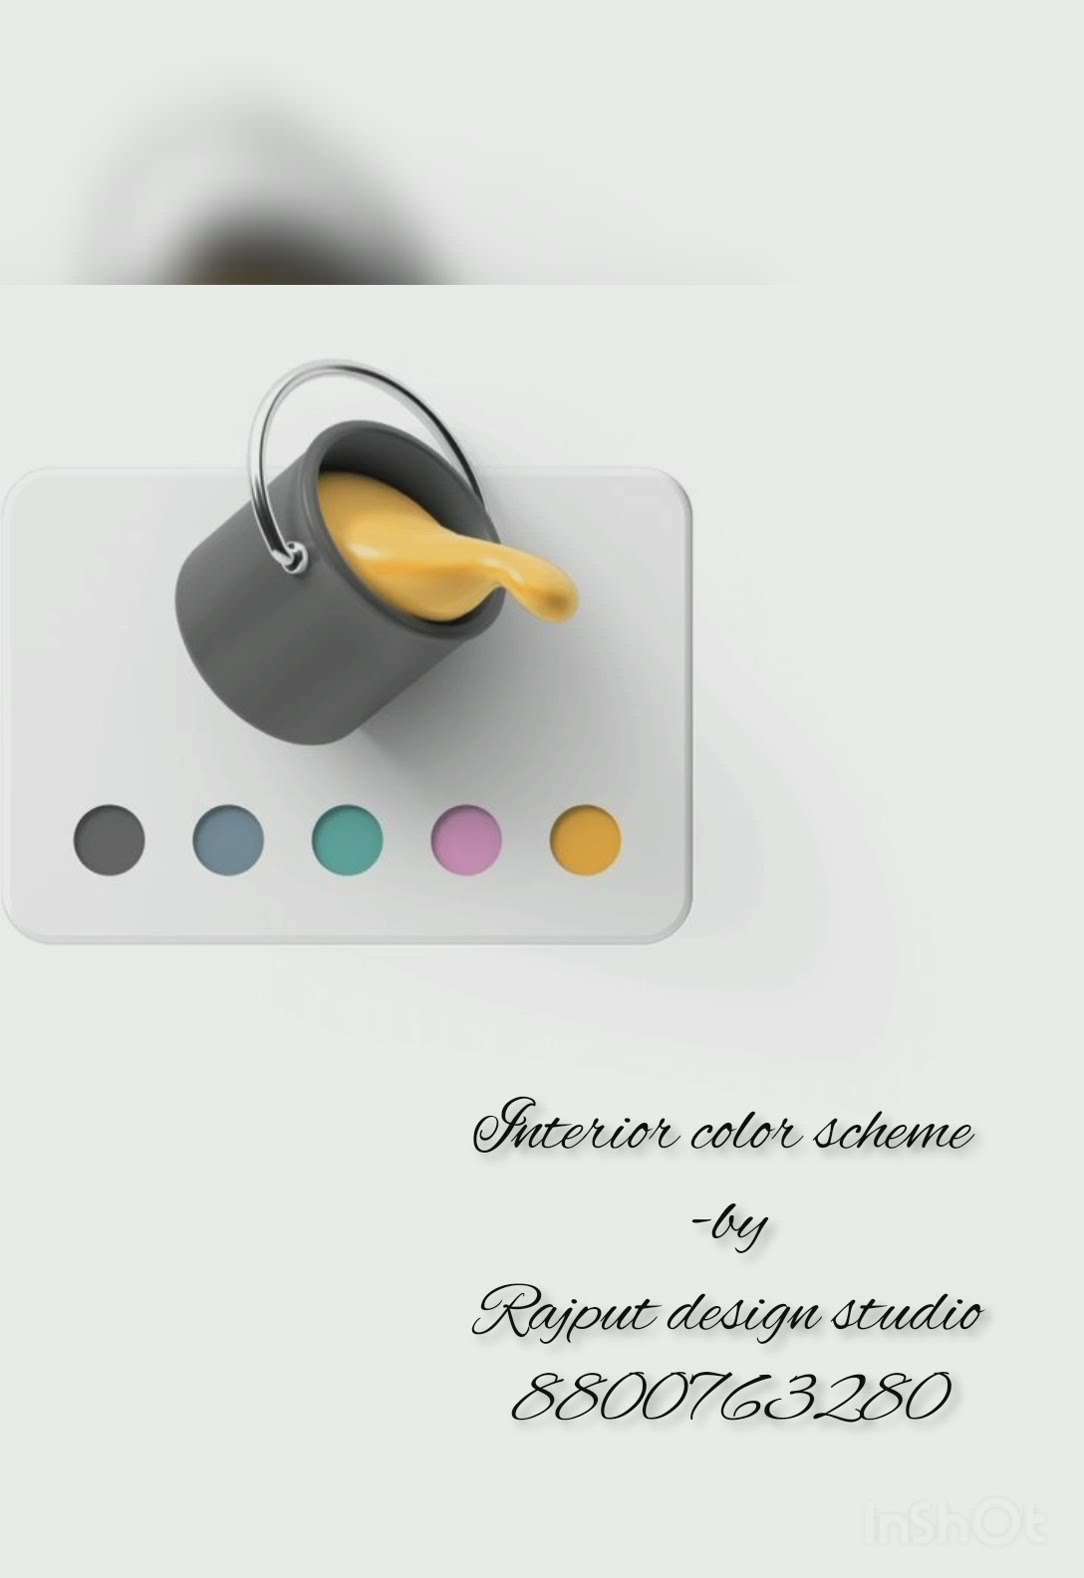 In art and design, a color scheme is an association of colors based on an organizational system. Basically, it's a set of colors that work well together to create a unified aesthetic. We can find our color scheme using a color wheel, a matrix of colors used to see how colors relate

want to design your space , feel free to us :
Contact no. :- 8800763280
Gmail ID :- A.rajputdesignstudio@gmail.com  

#HouseDesigns #color #BedroomDecor #HomeDecor #InteriorDesigner #Architect #LUXURY_INTERIOR #colorful #colorful #TexturePainting #WallPainting #Architectural&Interior #interiordesigers #KitchenIdeas #MasterBedroom #BedroomIdeas